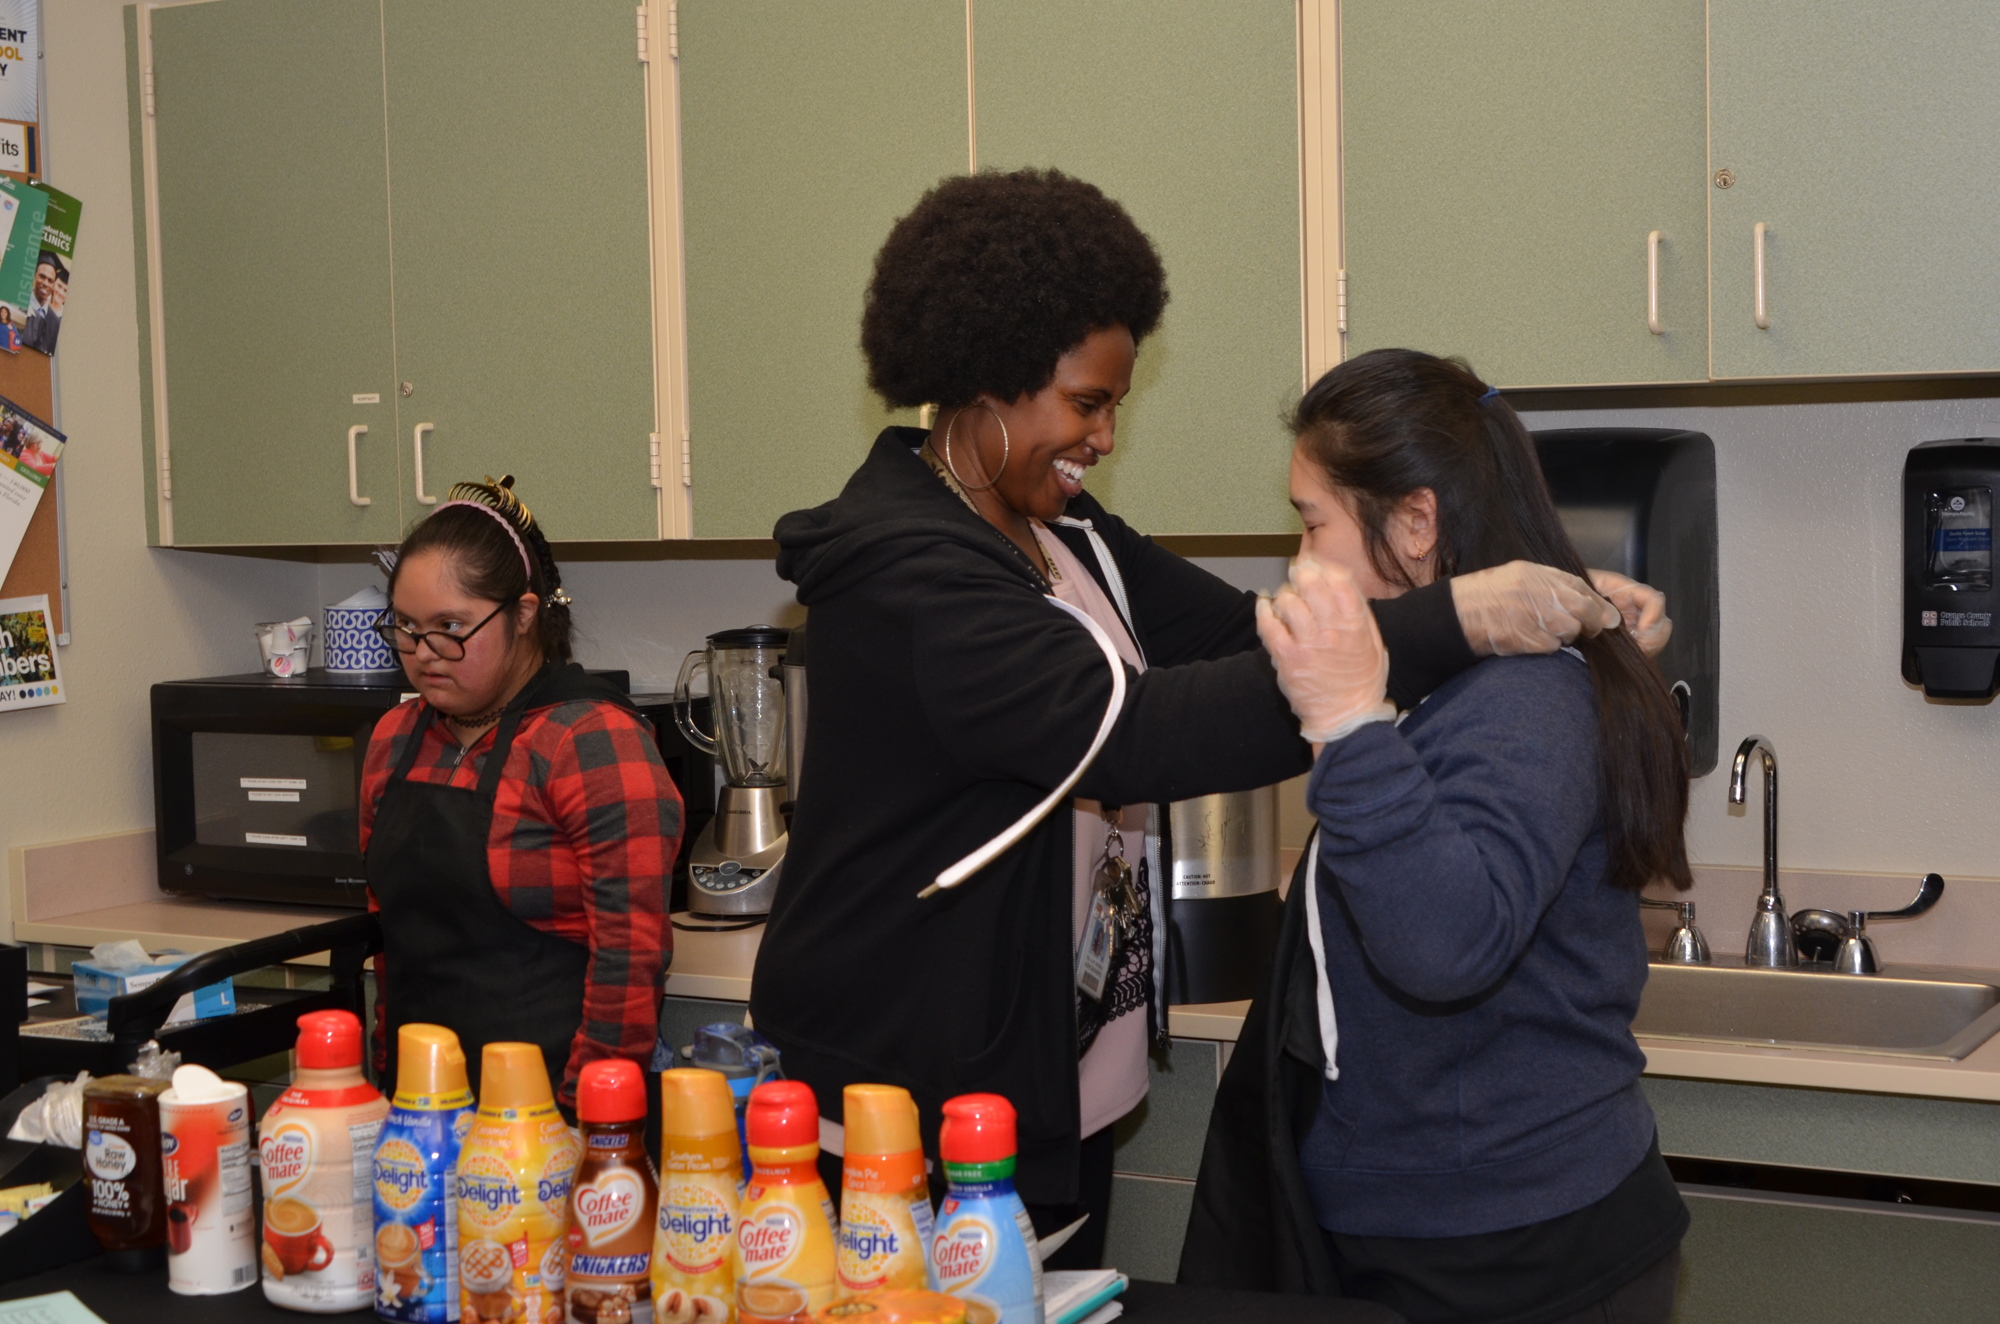 Special-needs teacher Olajumoke Adebimpe runs the Jump Start Café! with her students at Ocoee High School. Natalia Barriga-Sanchez, left, is one of the 10 who operate the coffee stand. With her is another student, Elizabeth Nguyen.